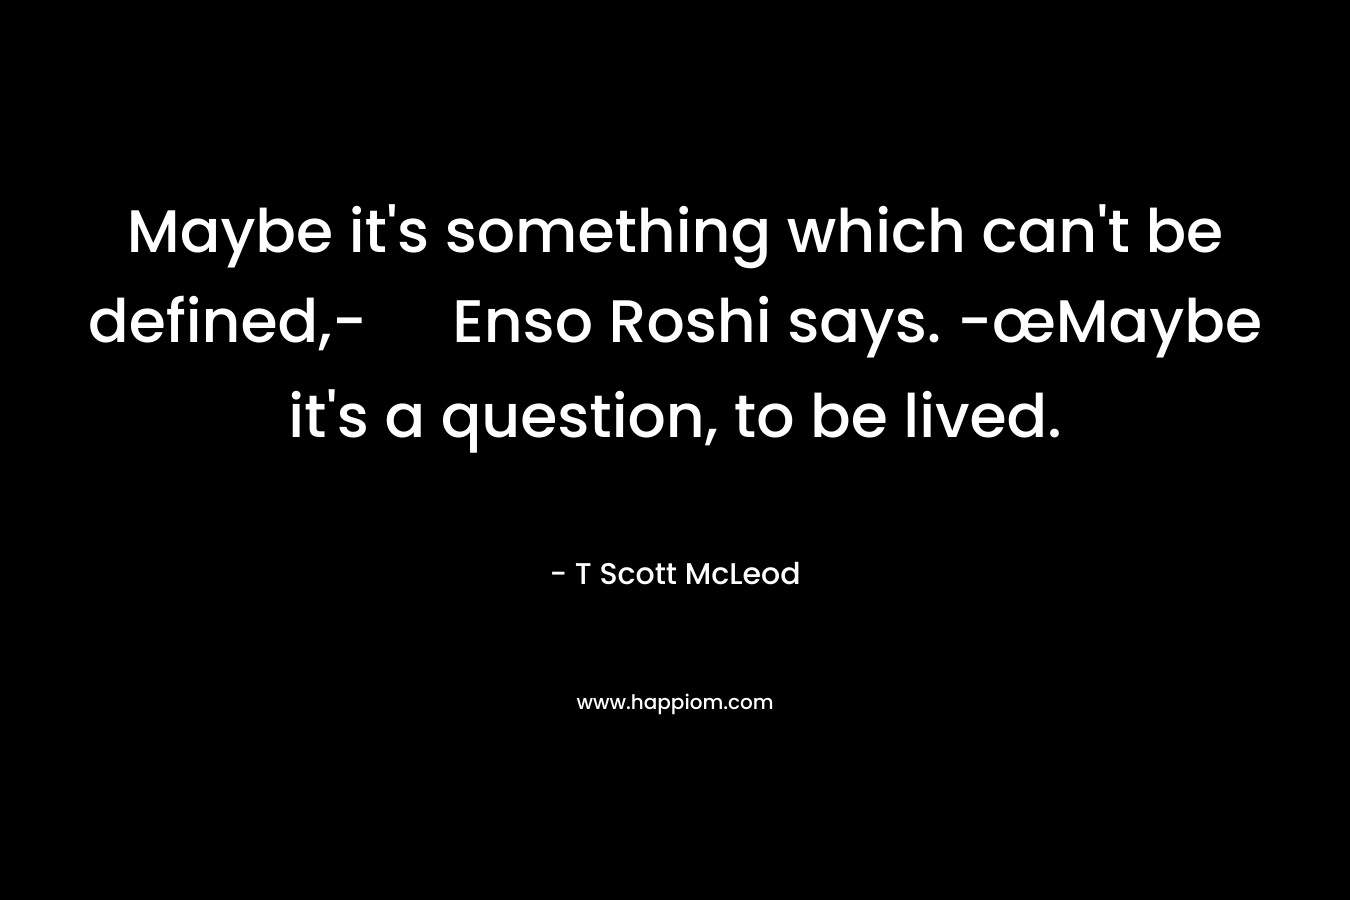 Maybe it's something which can't be defined,- Enso Roshi says. -œMaybe it's a question, to be lived.